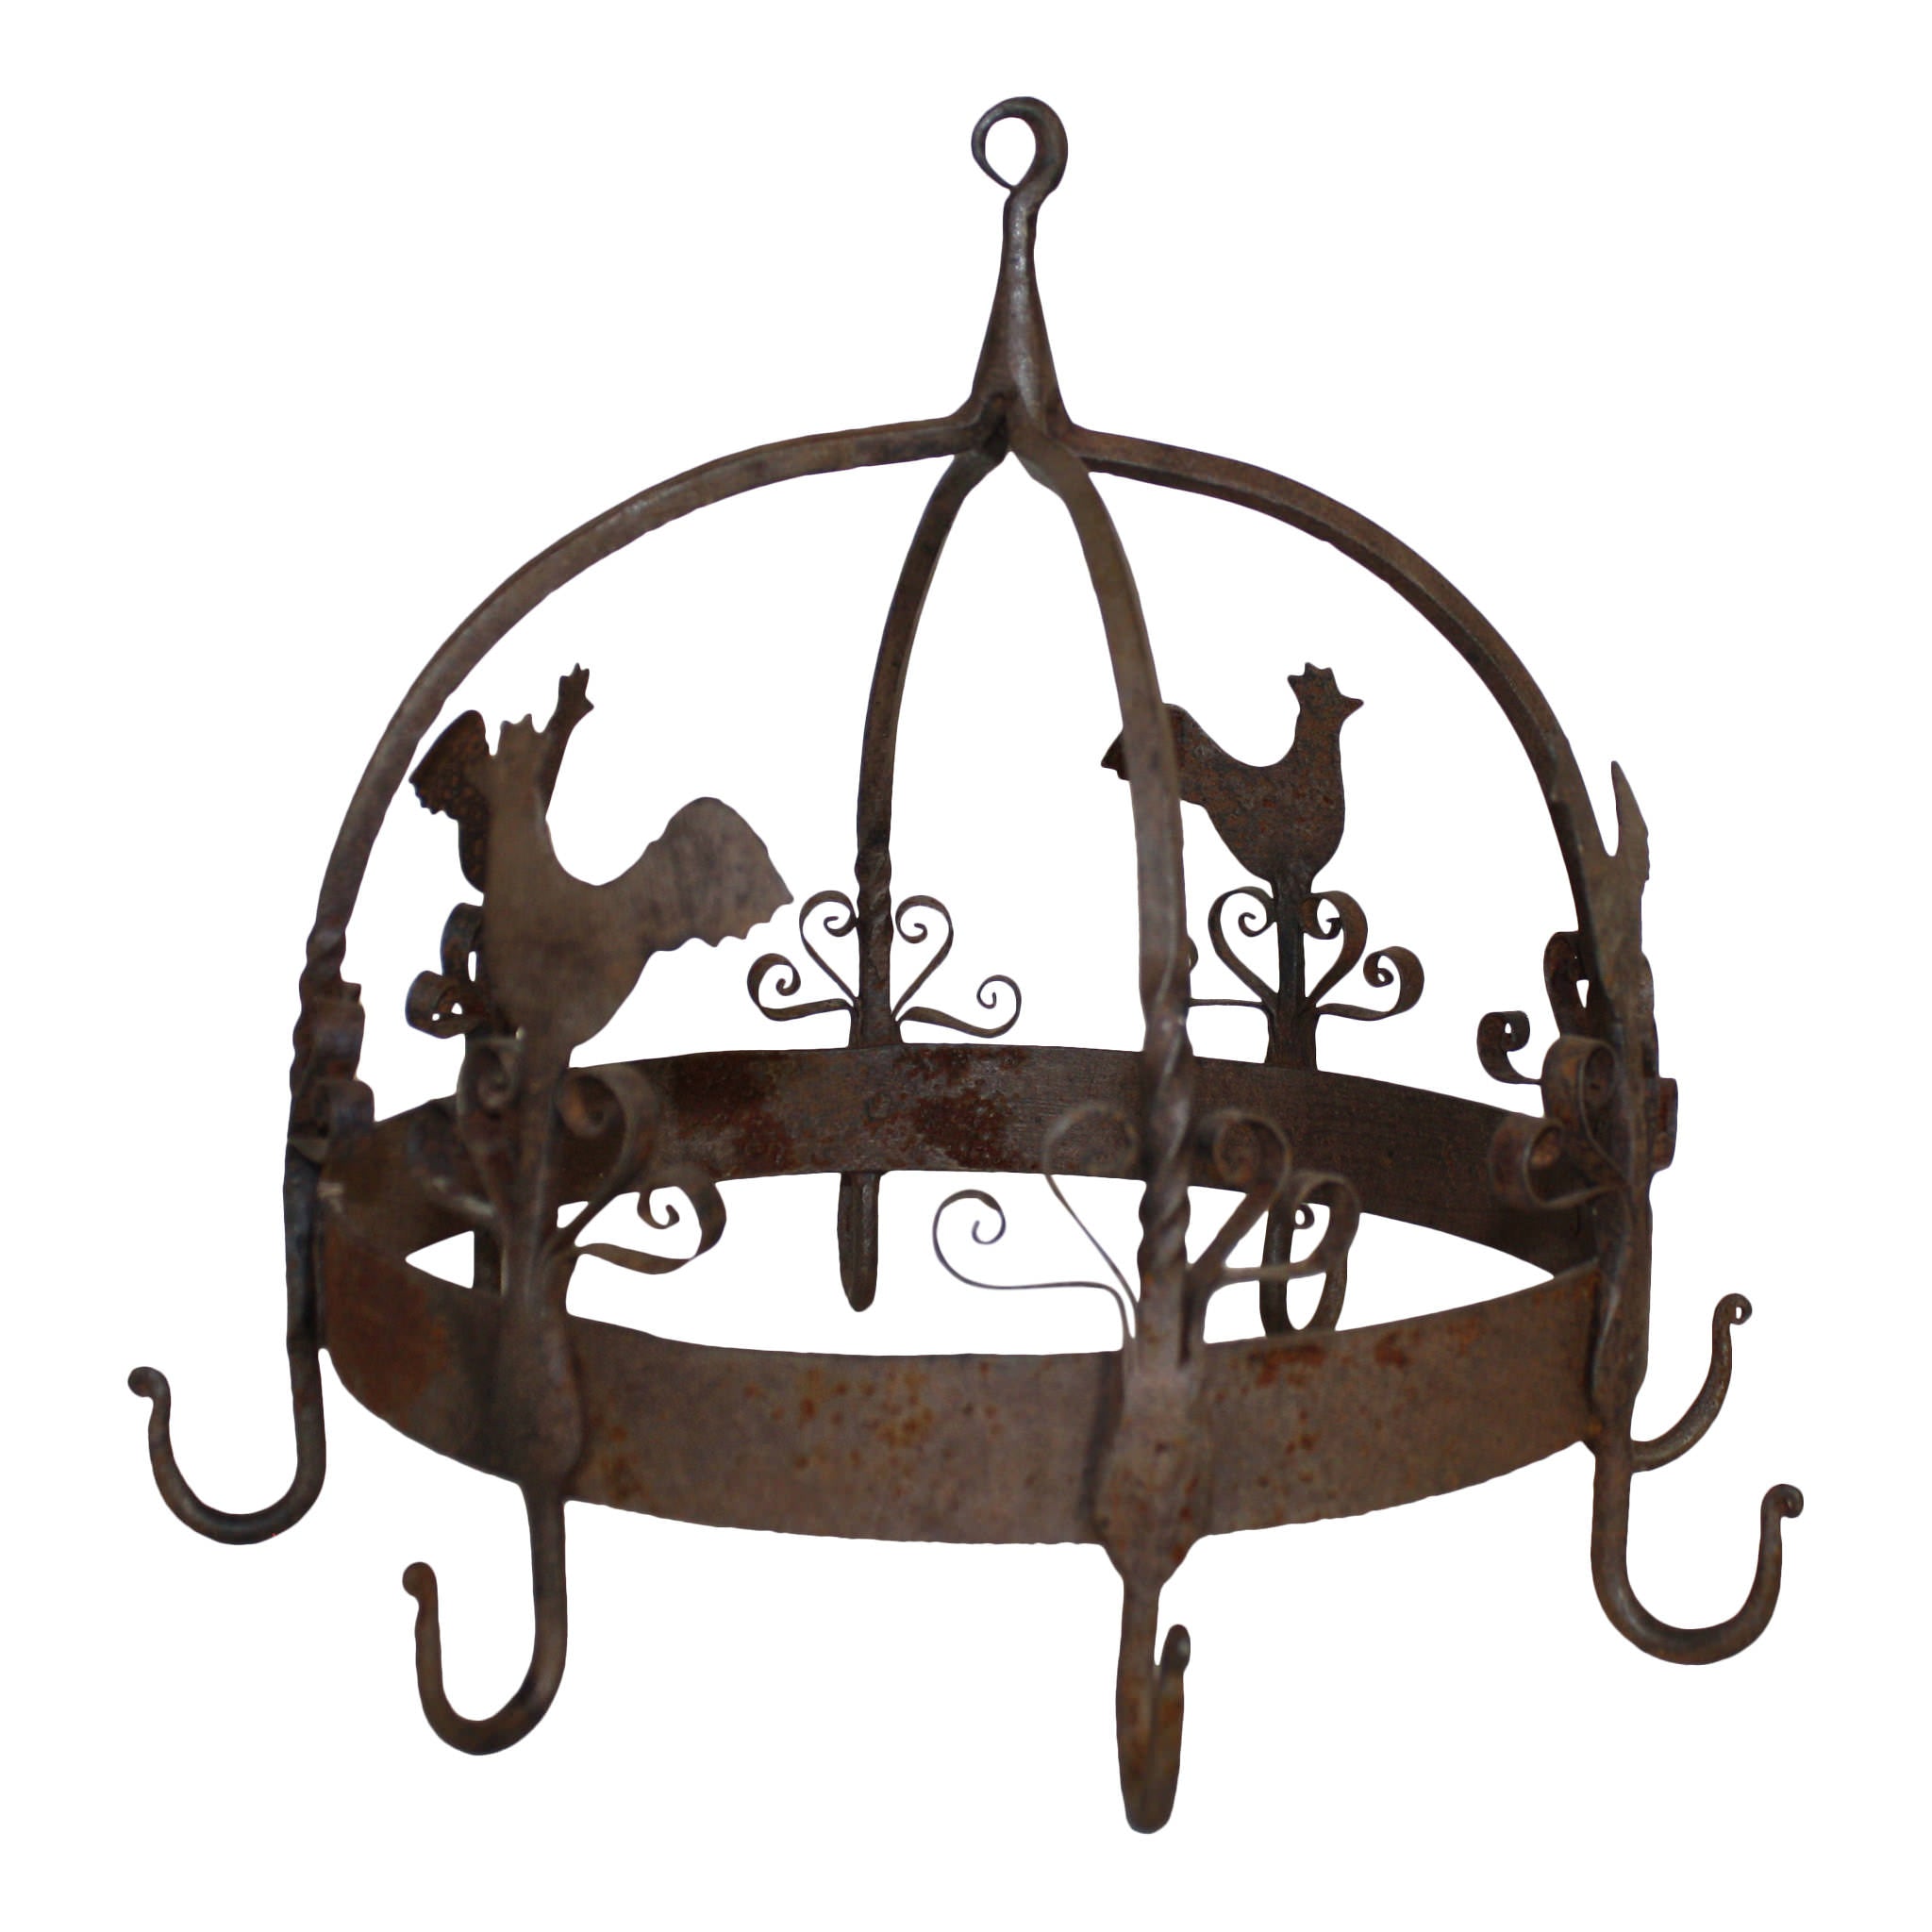 Hanging Iron Rack with Chickens